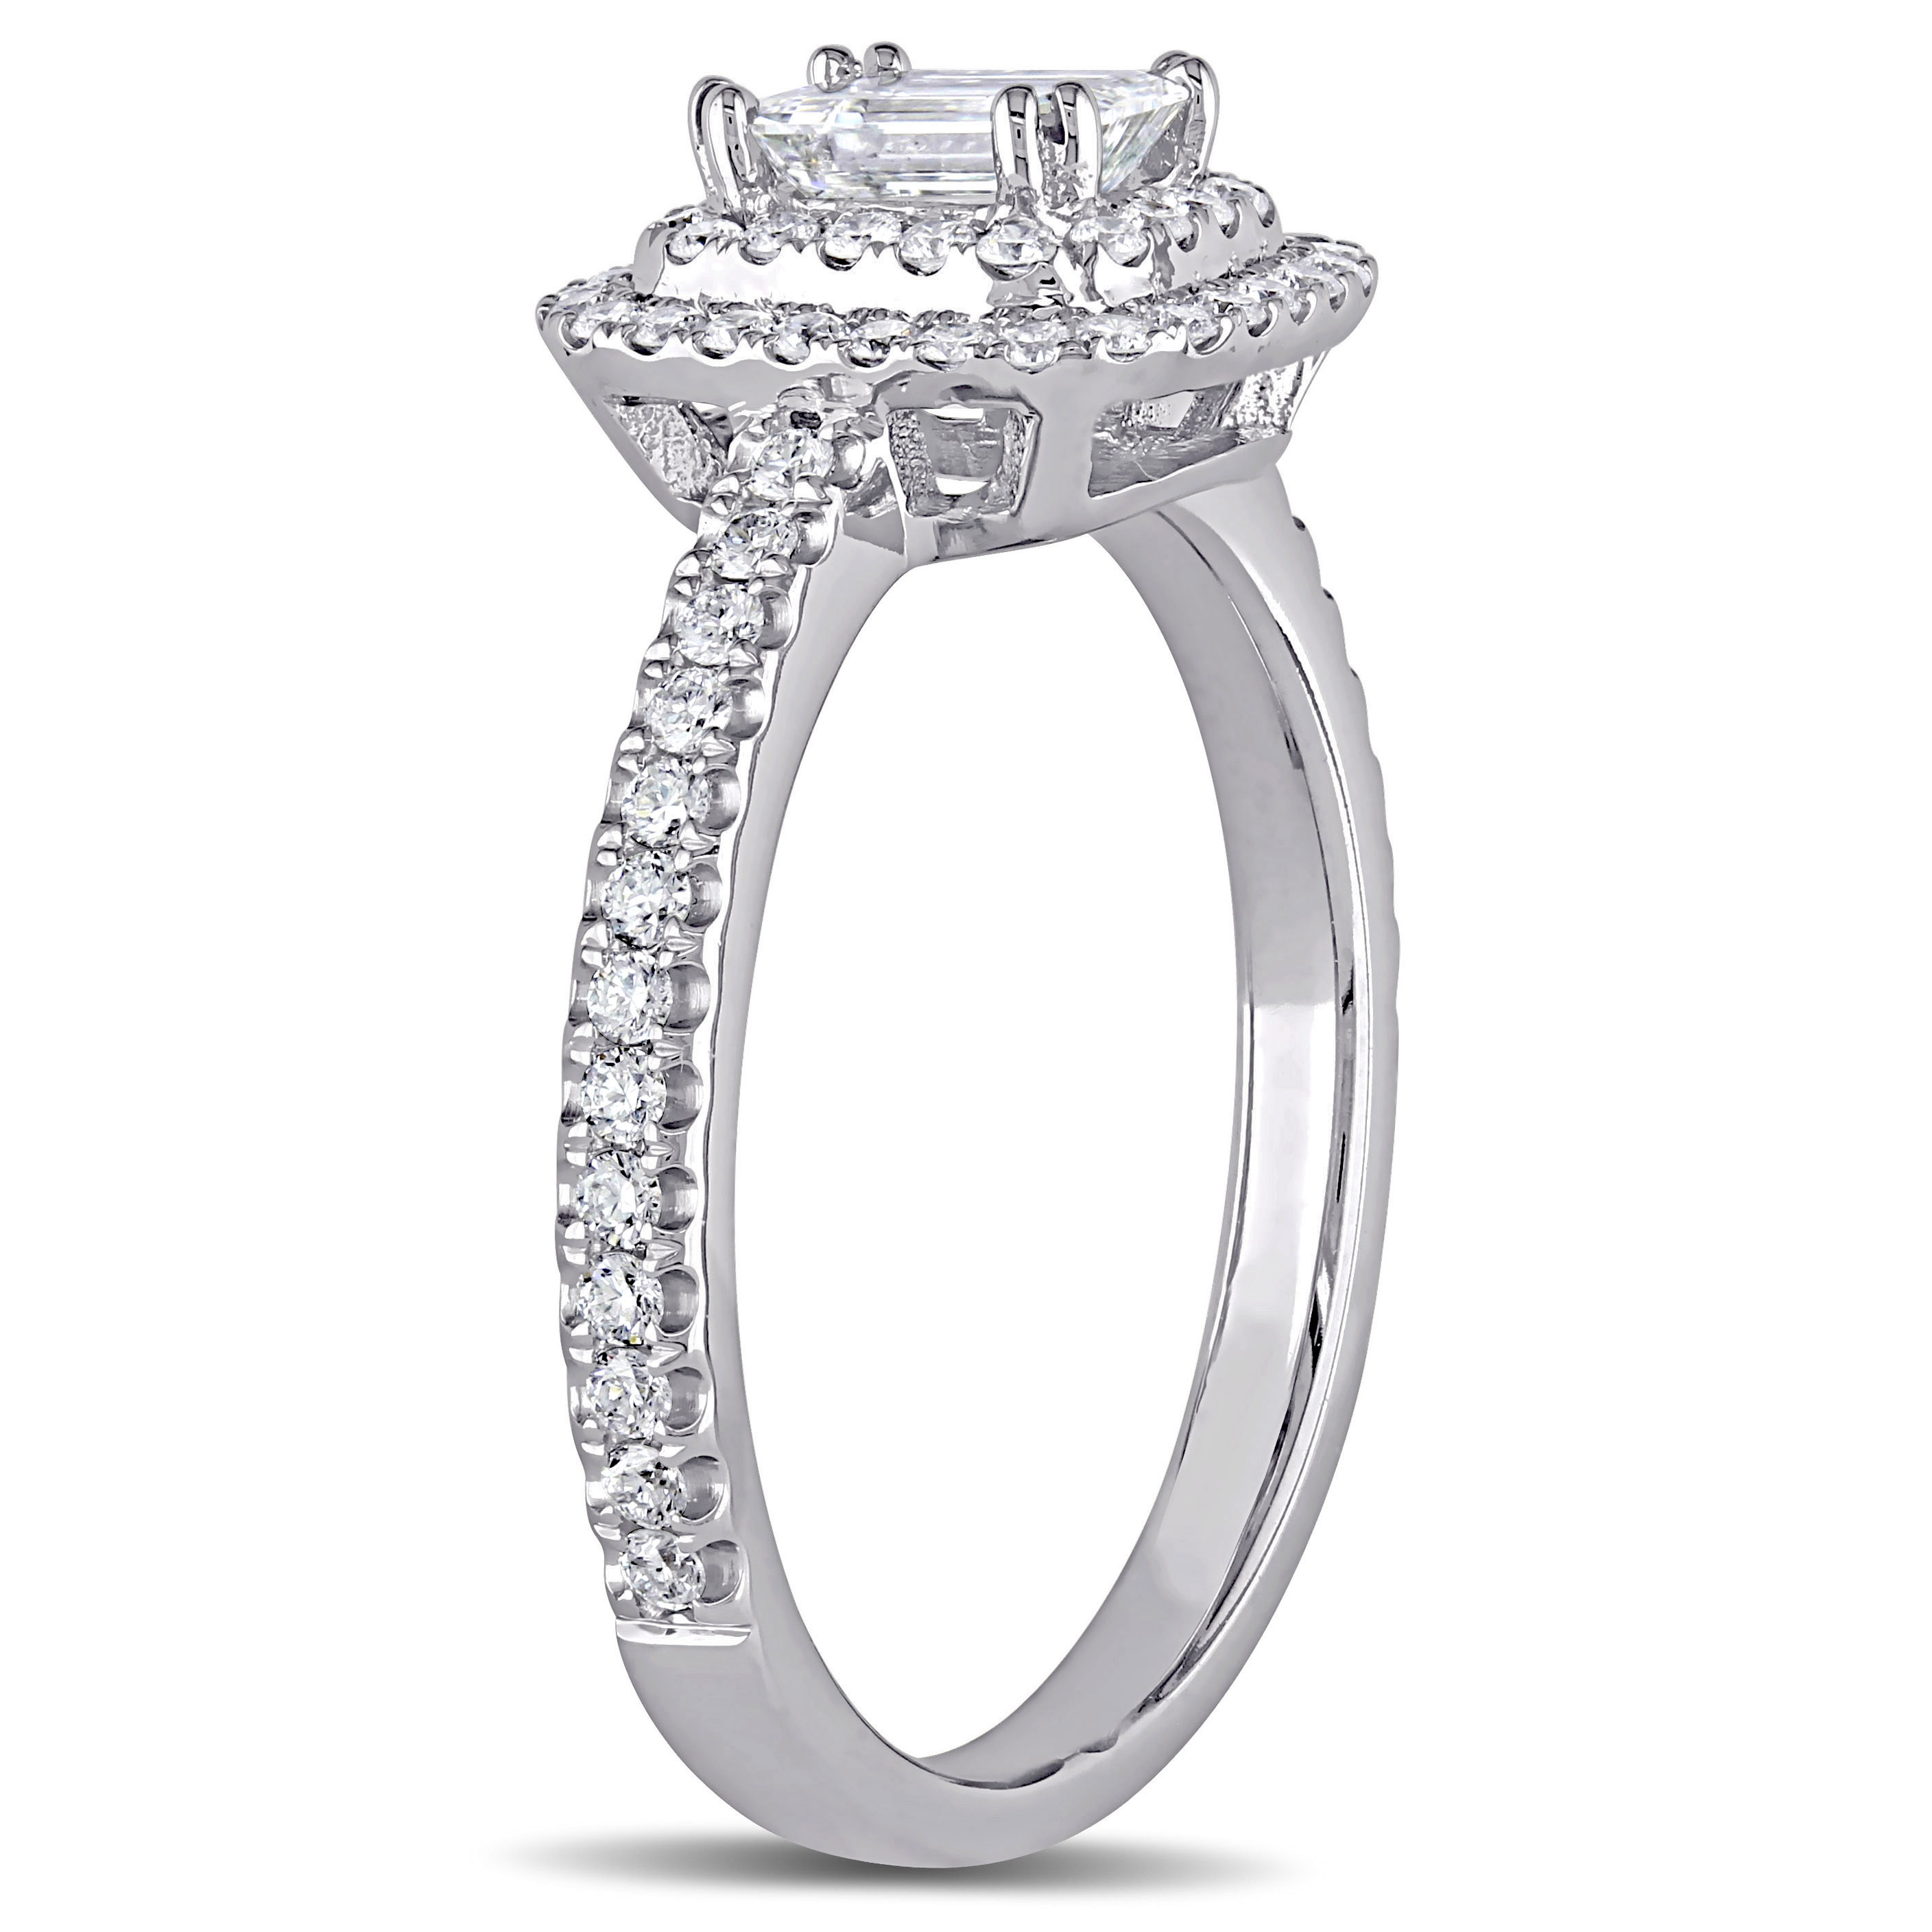 1 CT TW Emerald Cut and Round Diamond Double Halo Engagement Ring in 14k White Gold